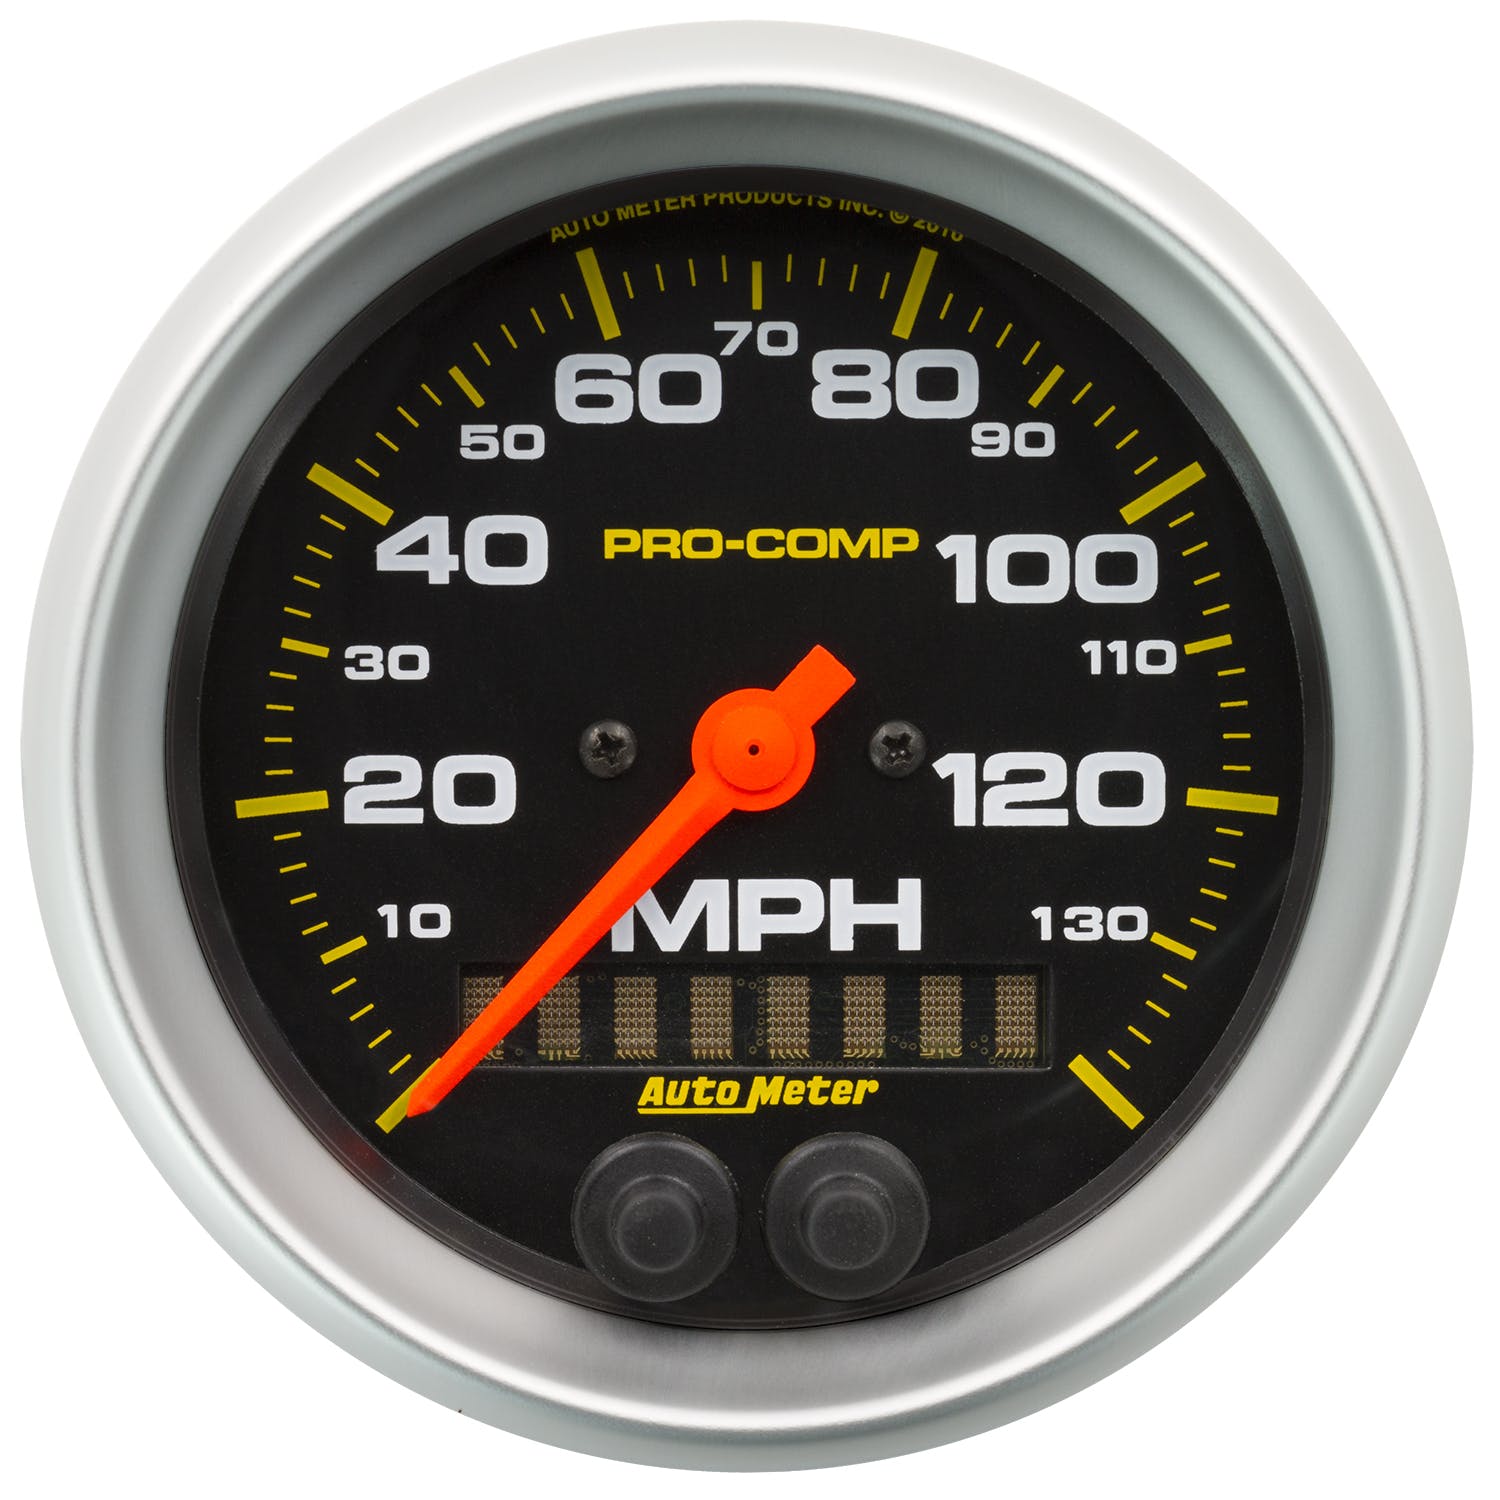 AutoMeter Products 5180 Pro-Comp Gauge, Speedometer, 3 3/8, 140mph, GPS